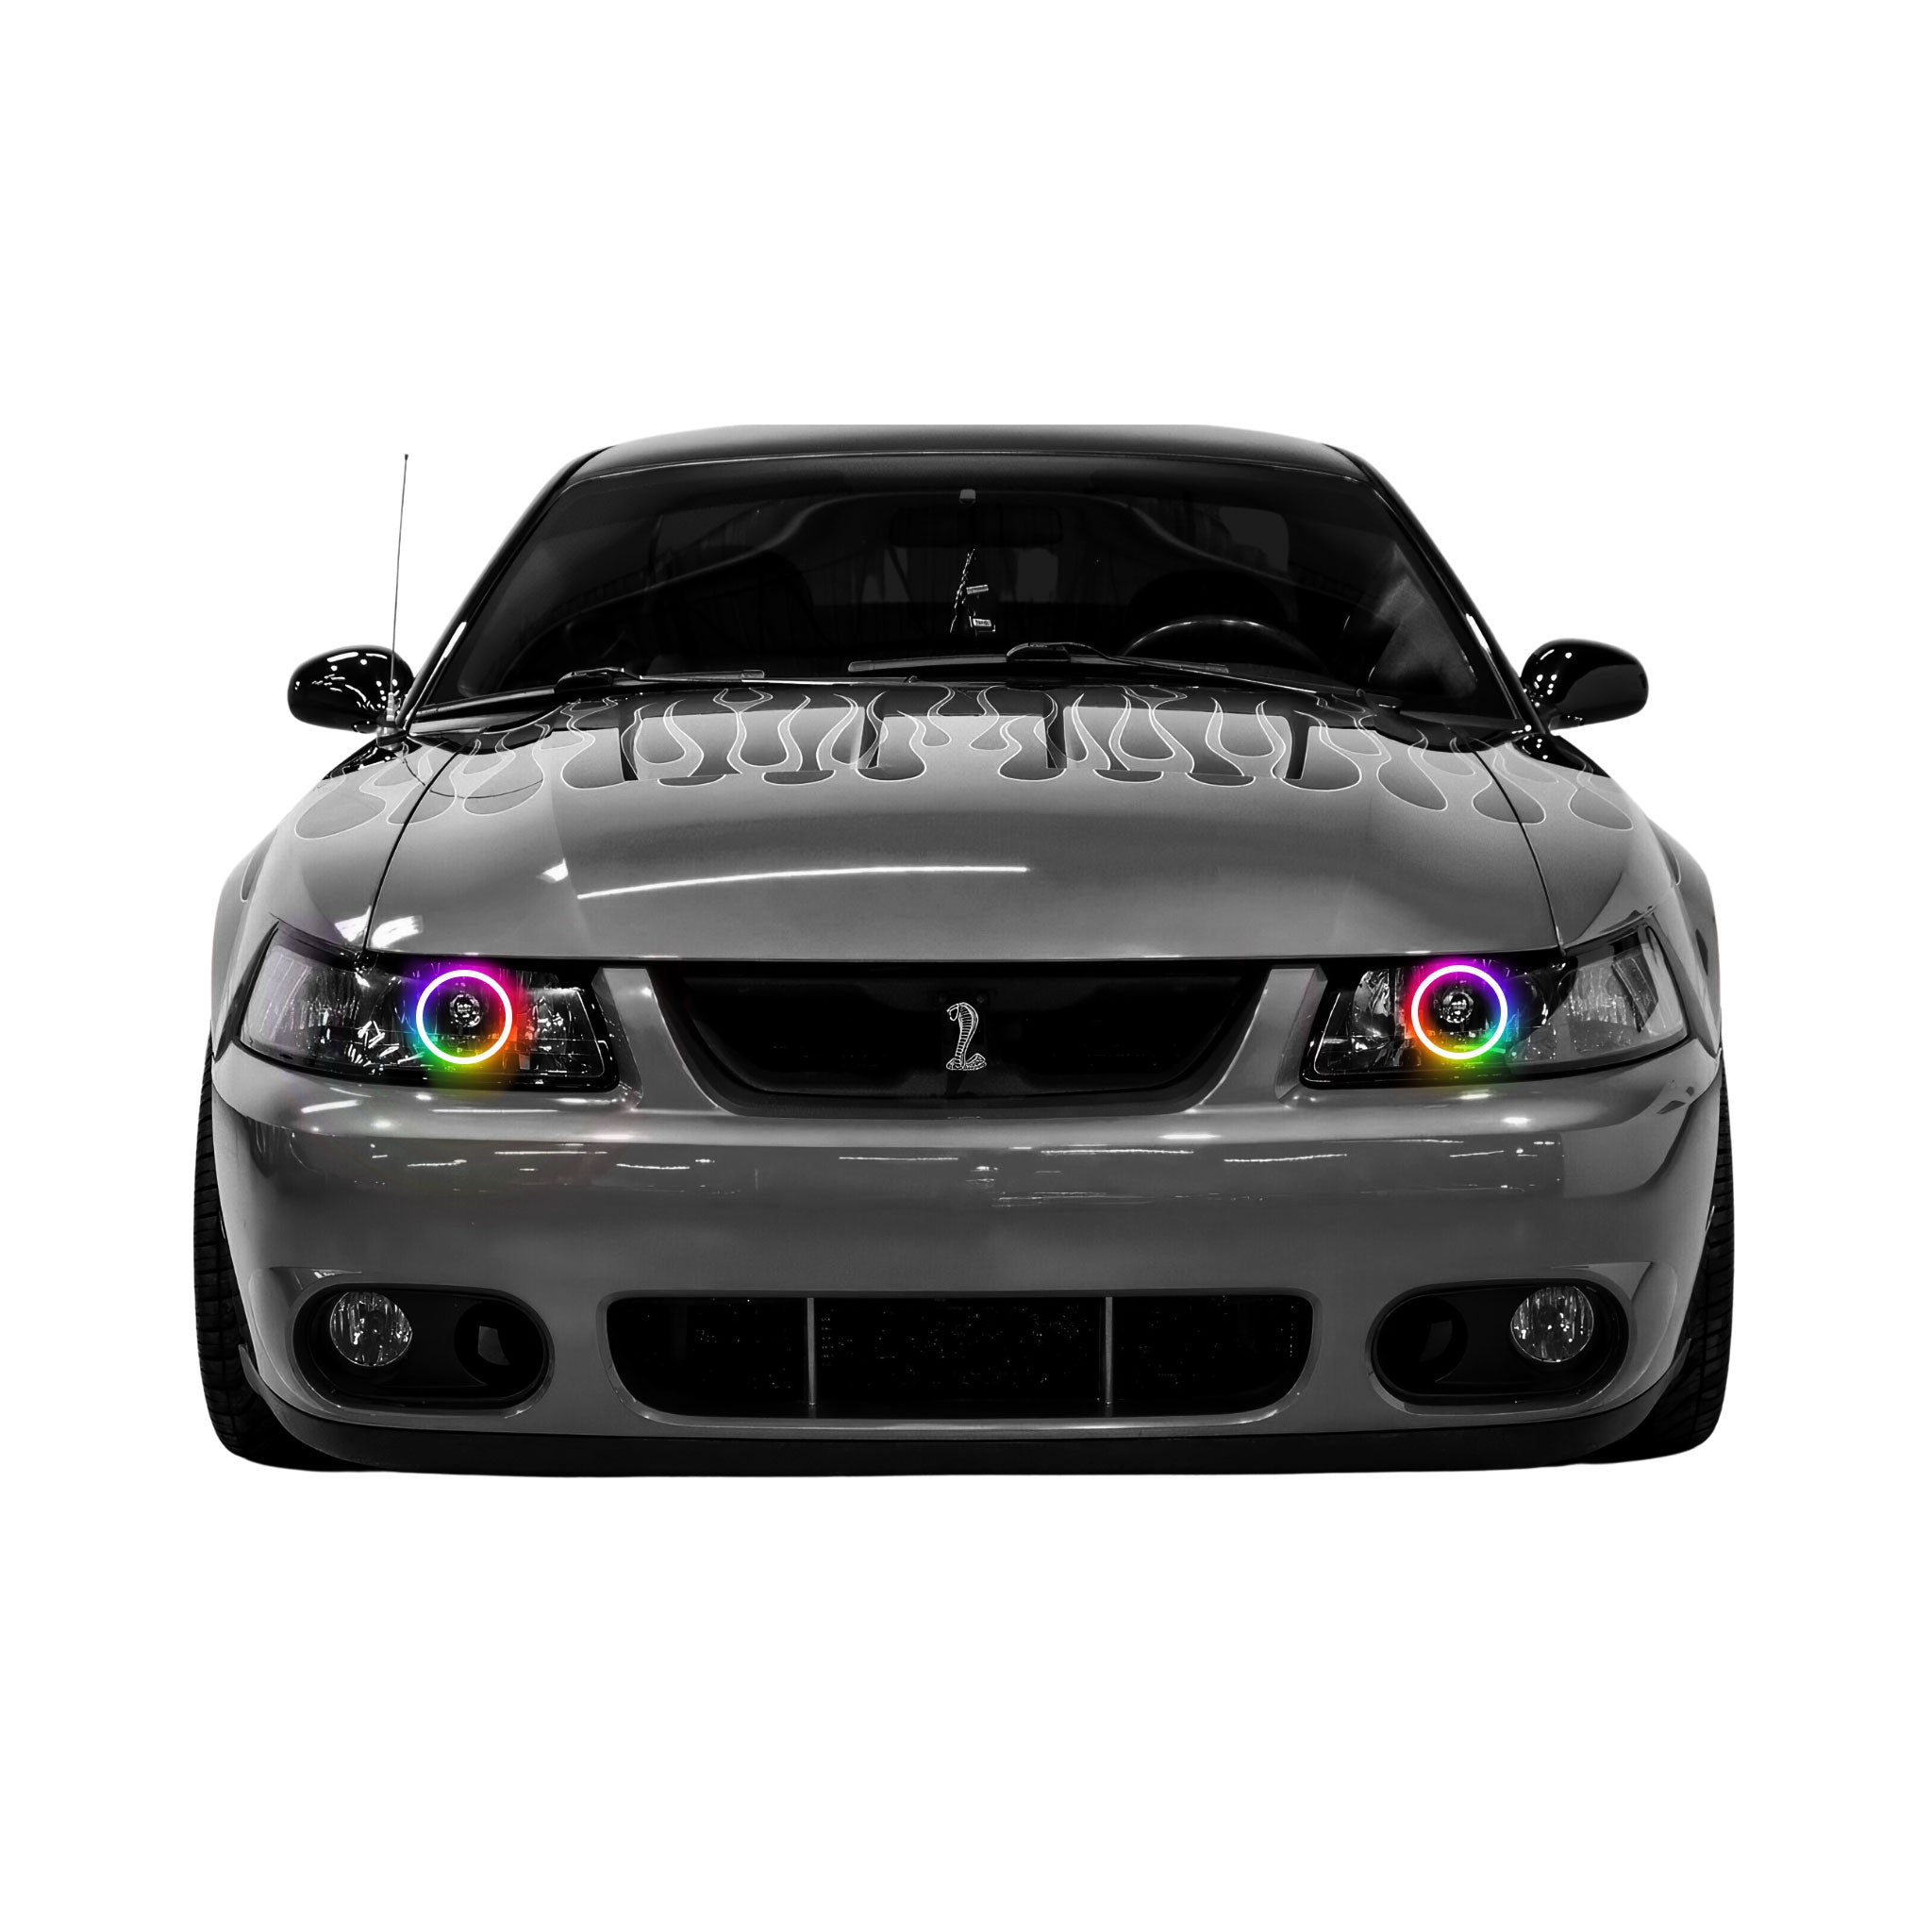 1994-2004 Ford Mustang Multicolor Halo Kit - RGB Halo Kits Multicolor Flow Series Color Chasing RGBWA LED headlight kit Colorshift Oracle Lighting Trendz OneUpLighting Morimoto theretrofitsource AutoLEDTech Diode Dynamics